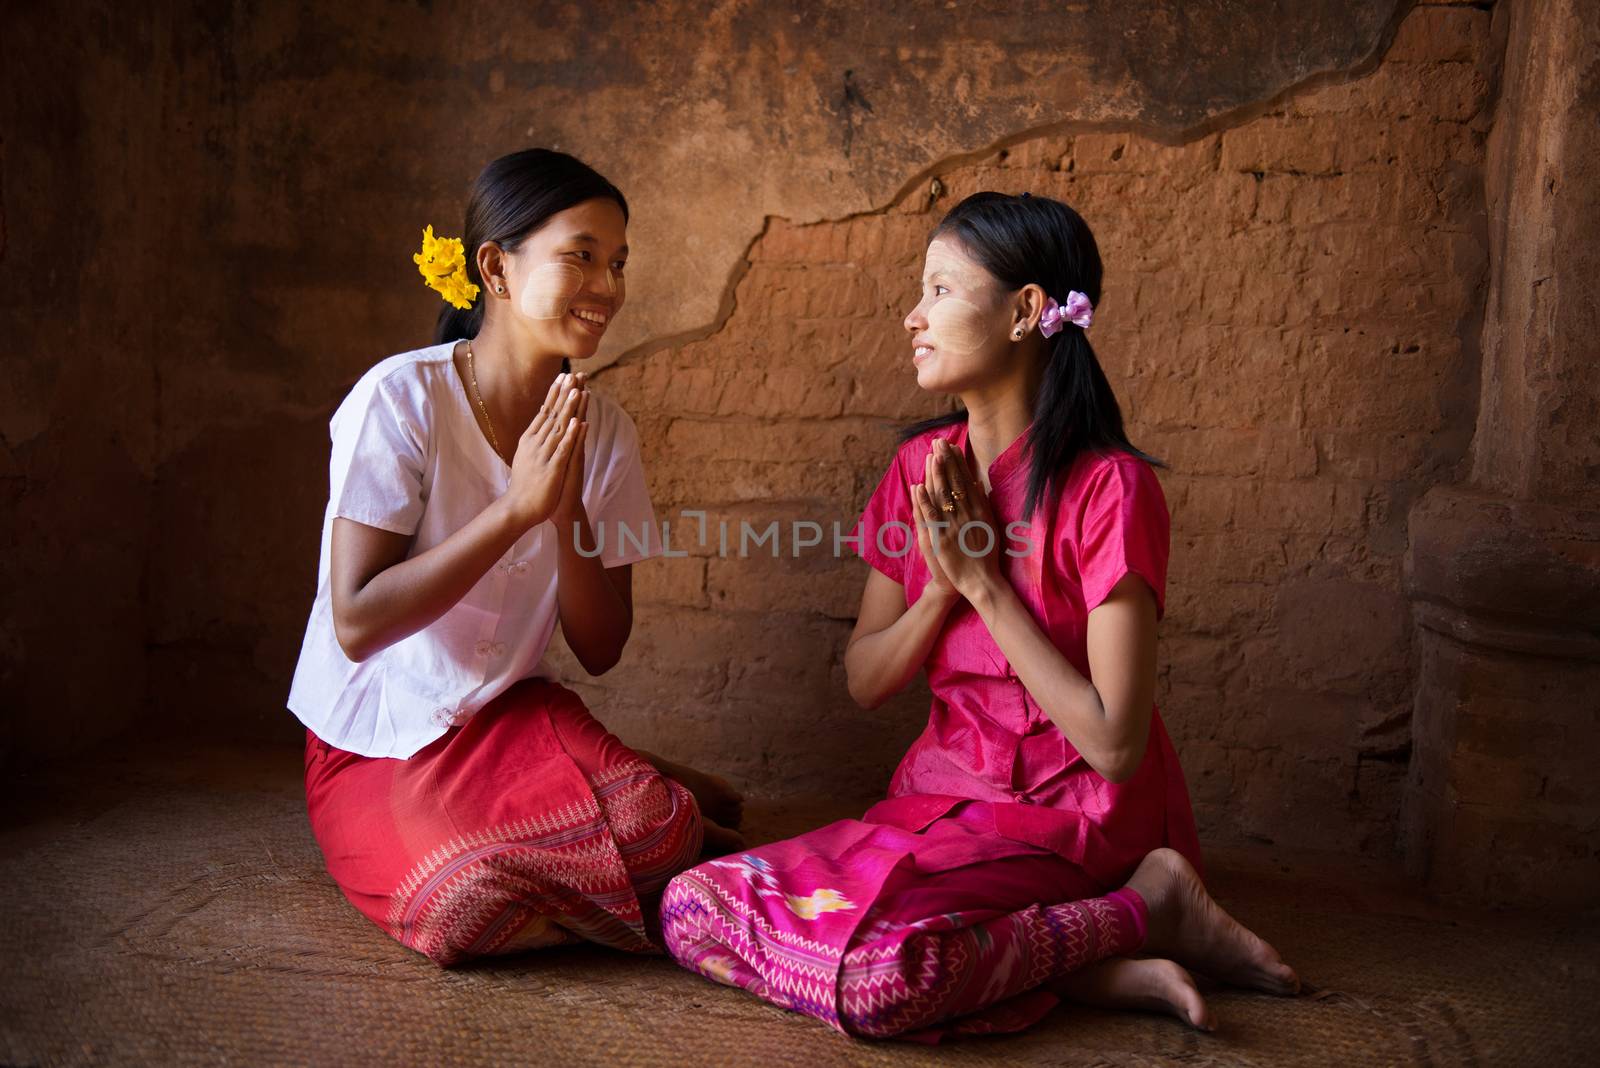 Two young Myanmar girl in a traditional welcoming gesture, sitting inside temple.